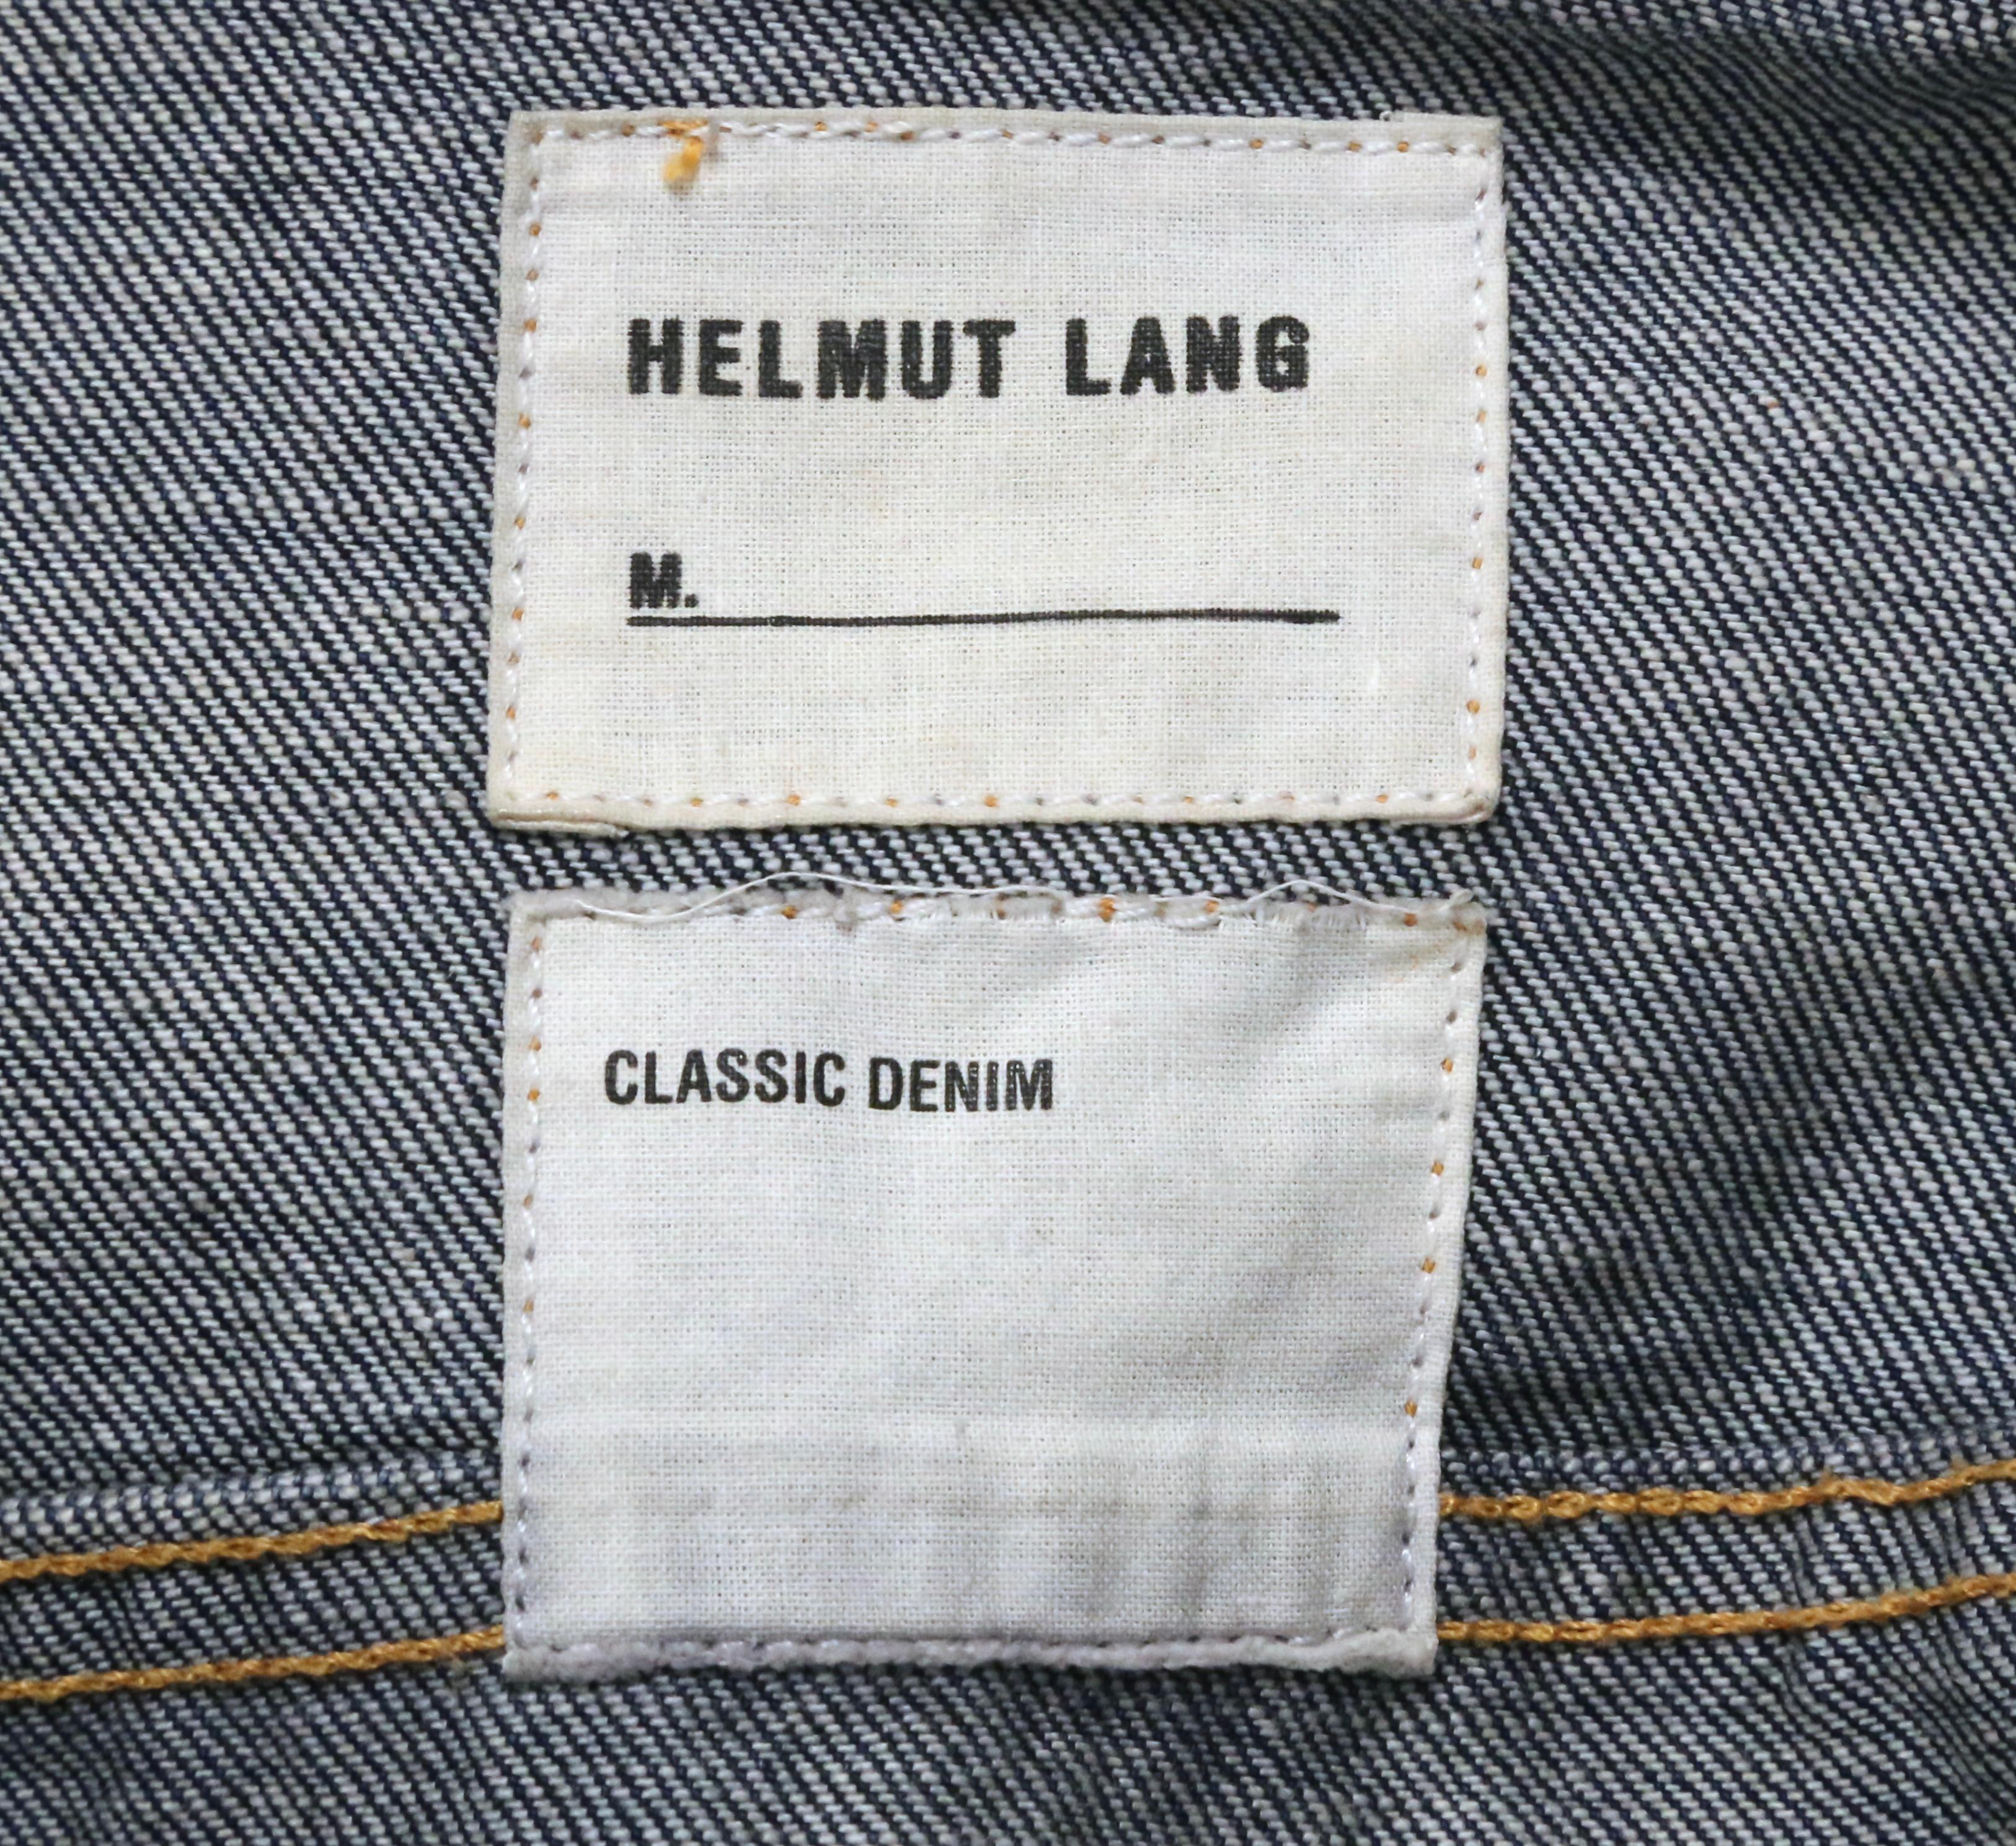 1990's HELMUT LANG classic denim jacket with extra long turn up cuffs For Sale 3